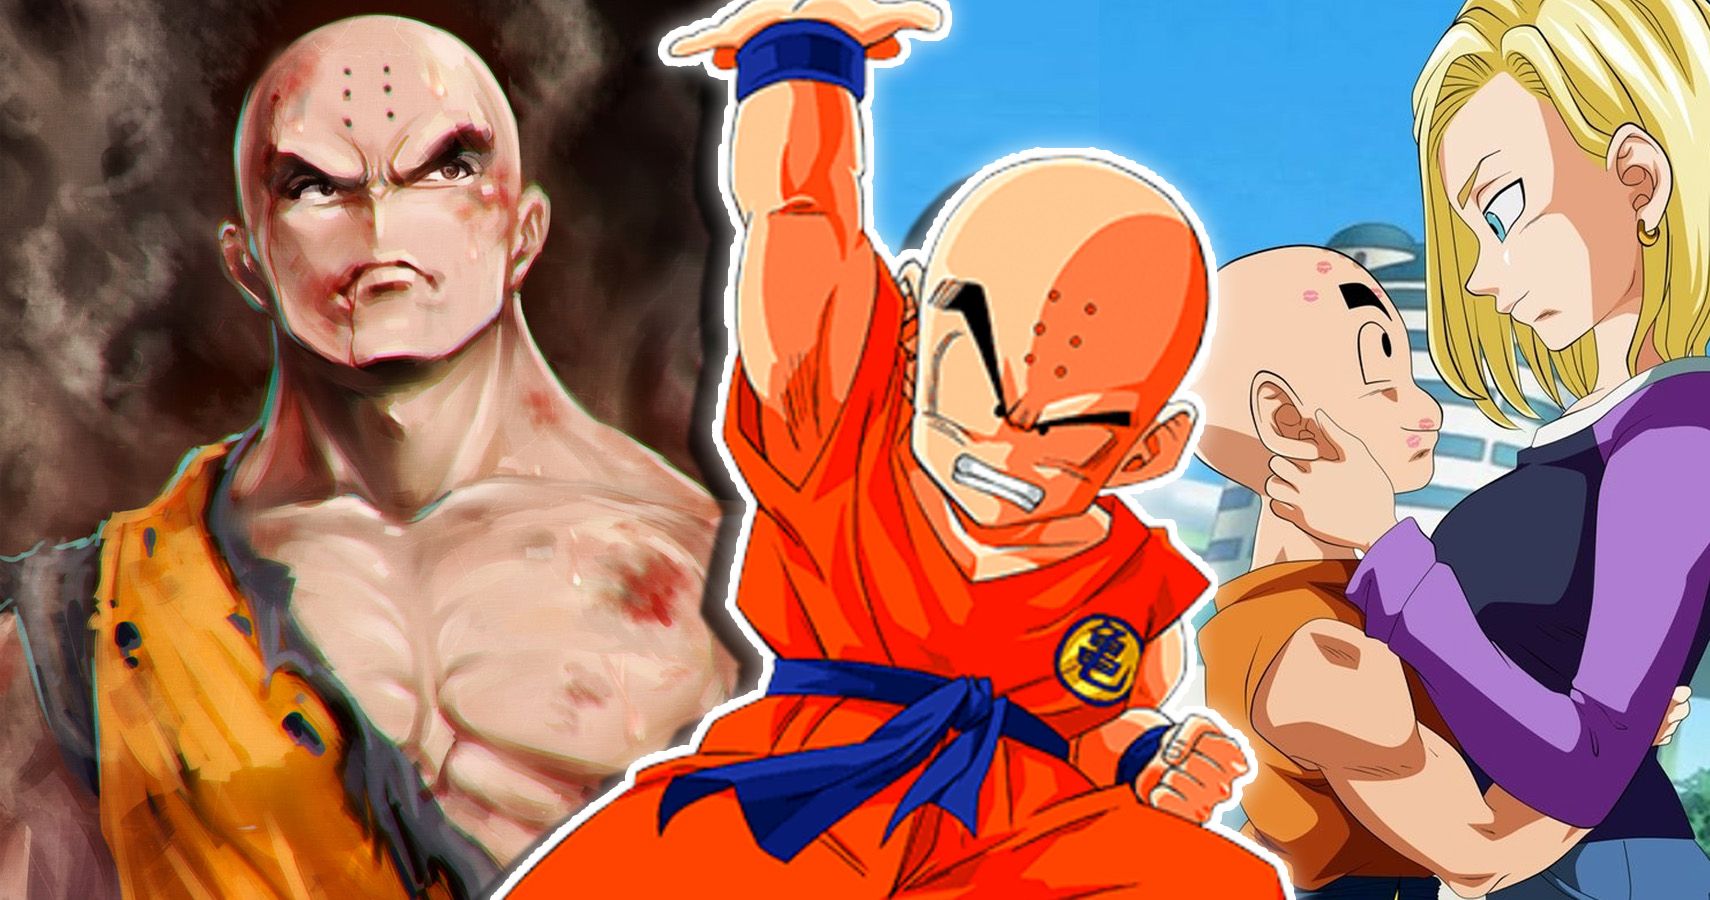 24 Awesome Facts You Never Knew About Krillin s Power In Dragon Ball Z. www...